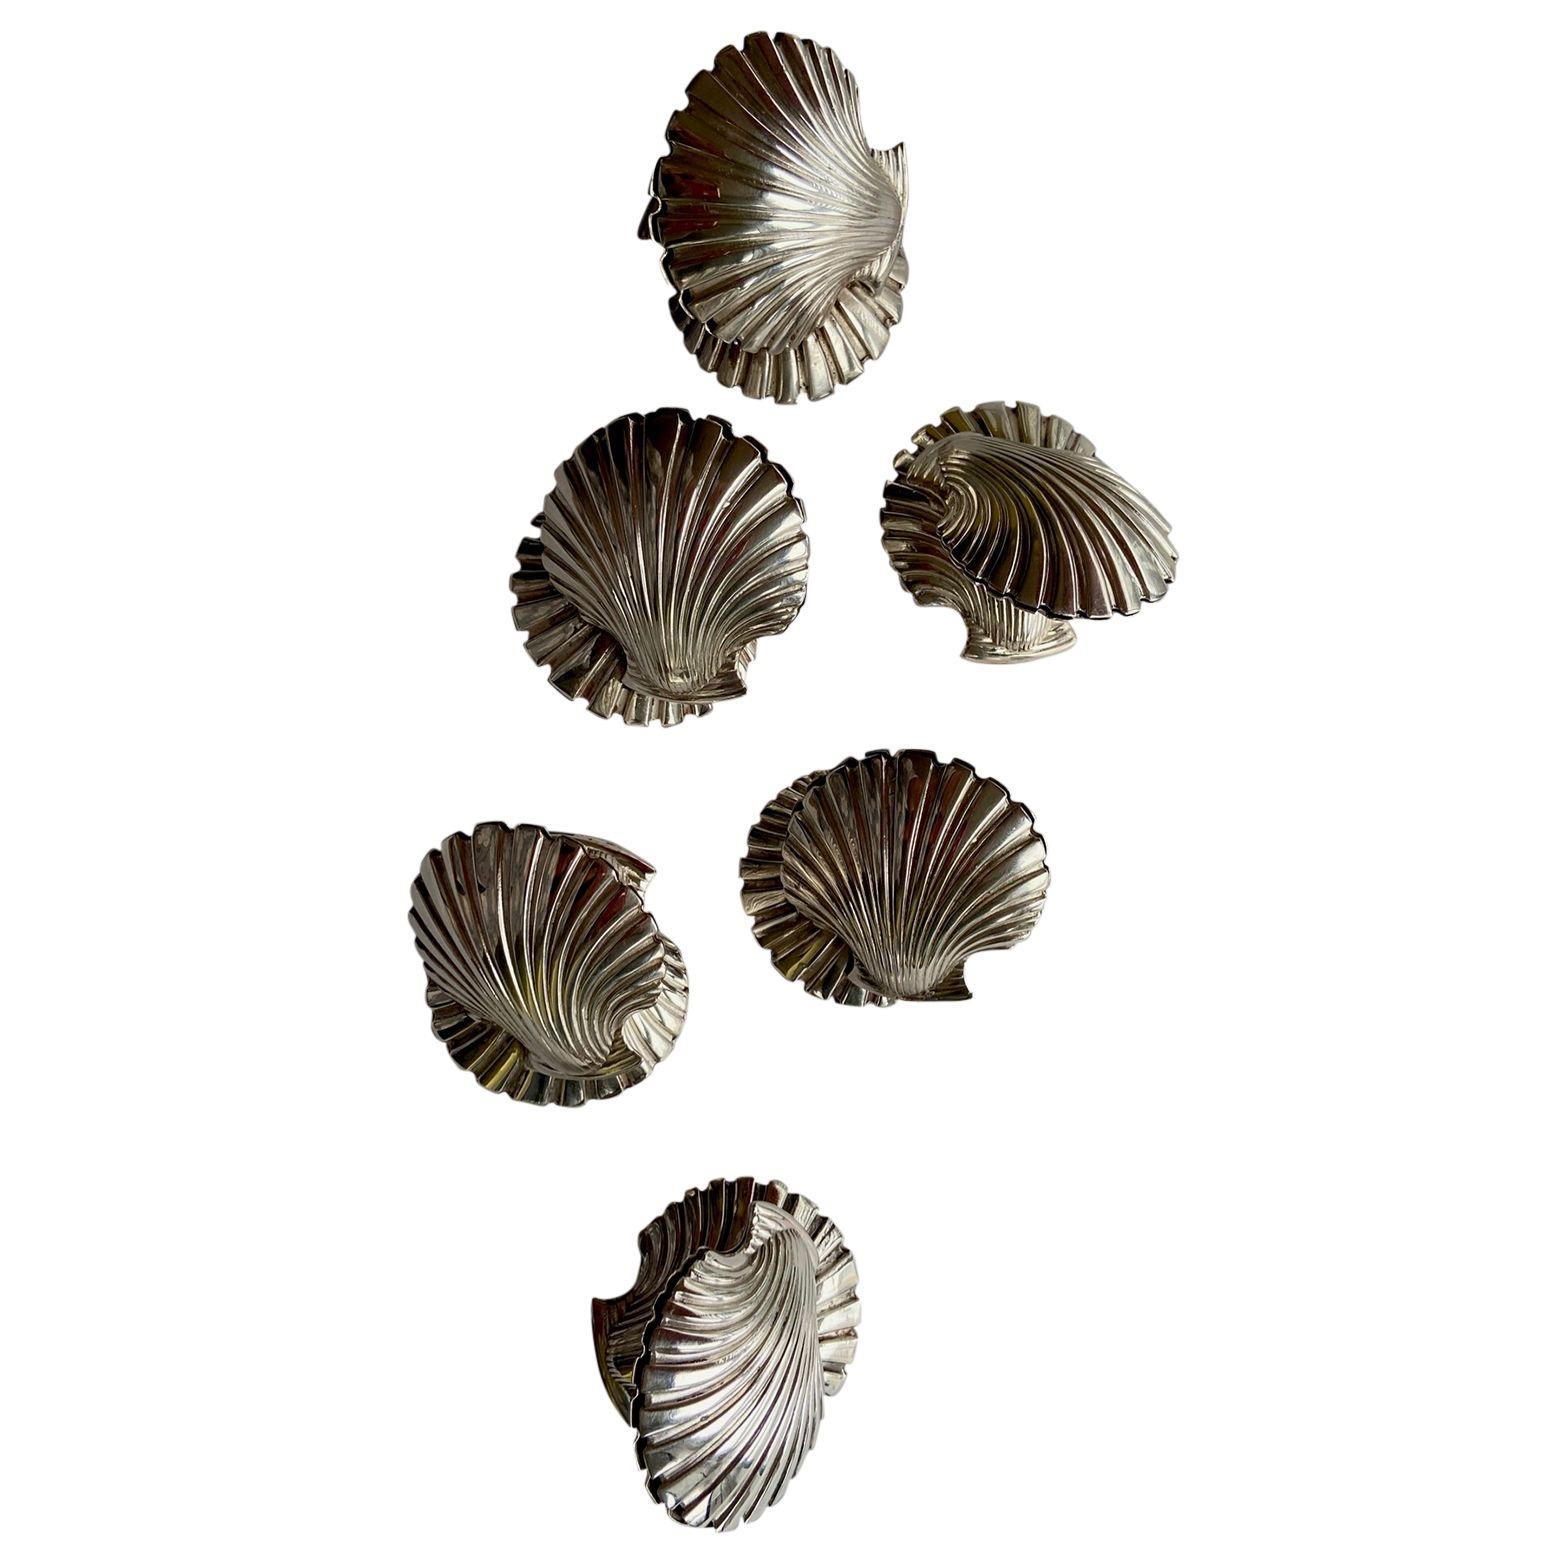 6 Vintage 1940s-1950s Silver Plated Shells, Place Card Holders, Fratelli Broggi For Sale 1